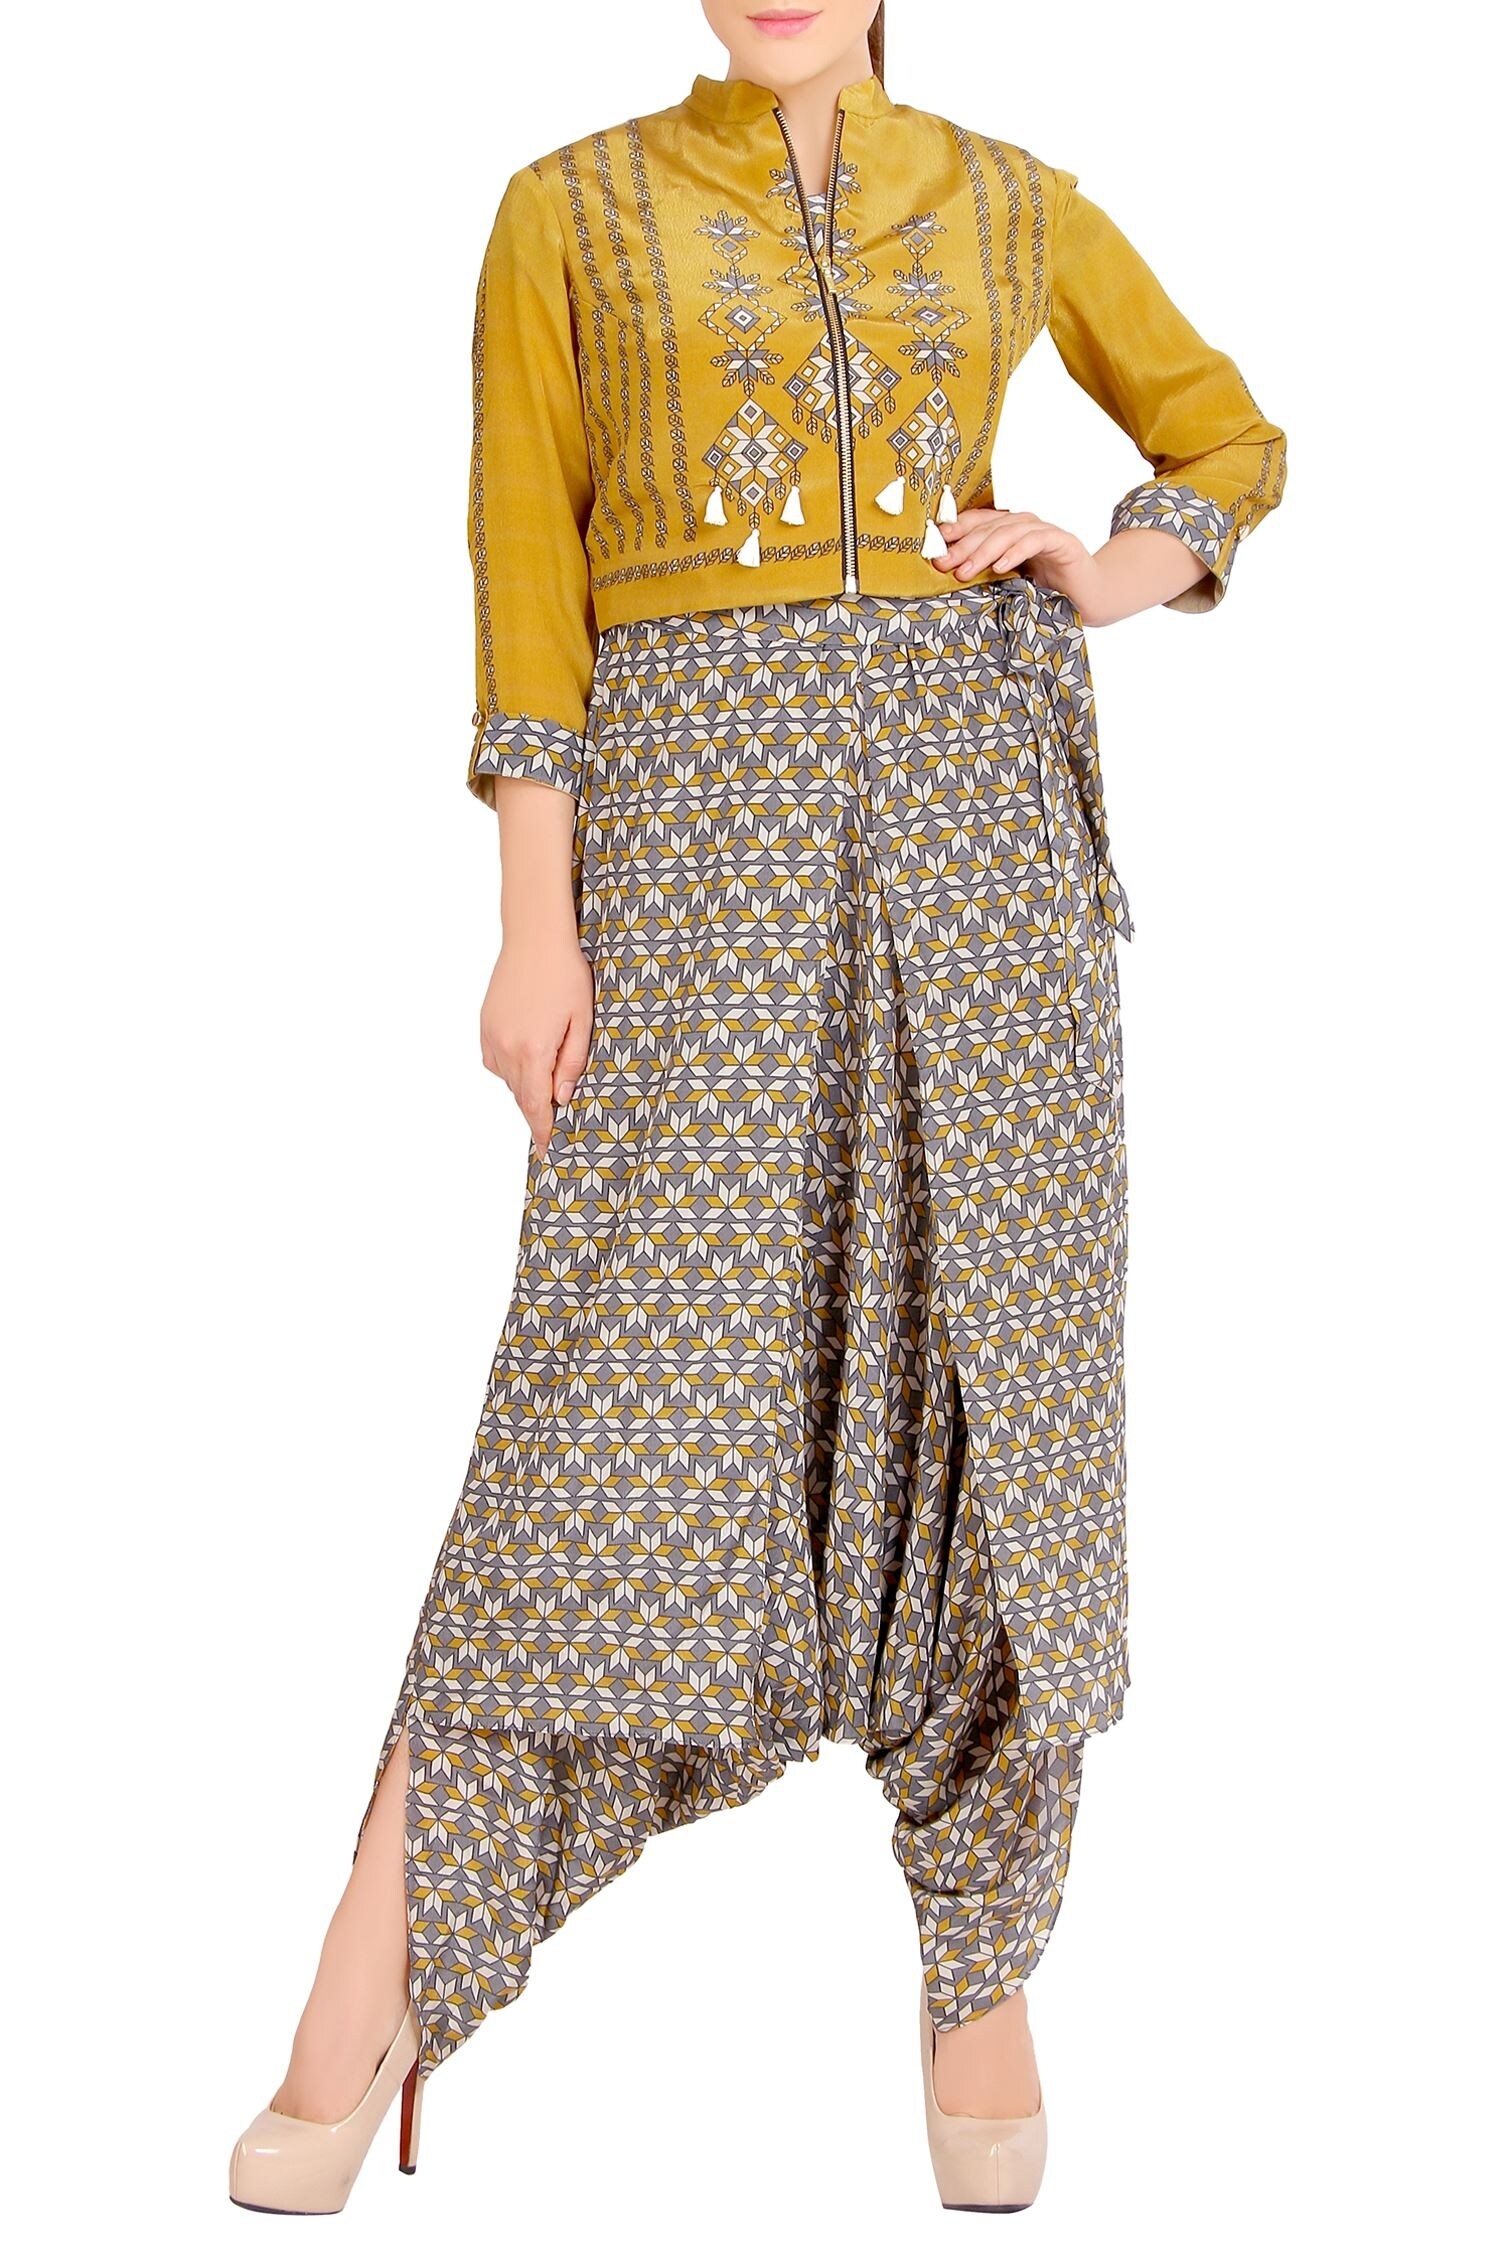 Soup by Sougat Paul Yellow Printed Jumpsuit With Jacket For Women